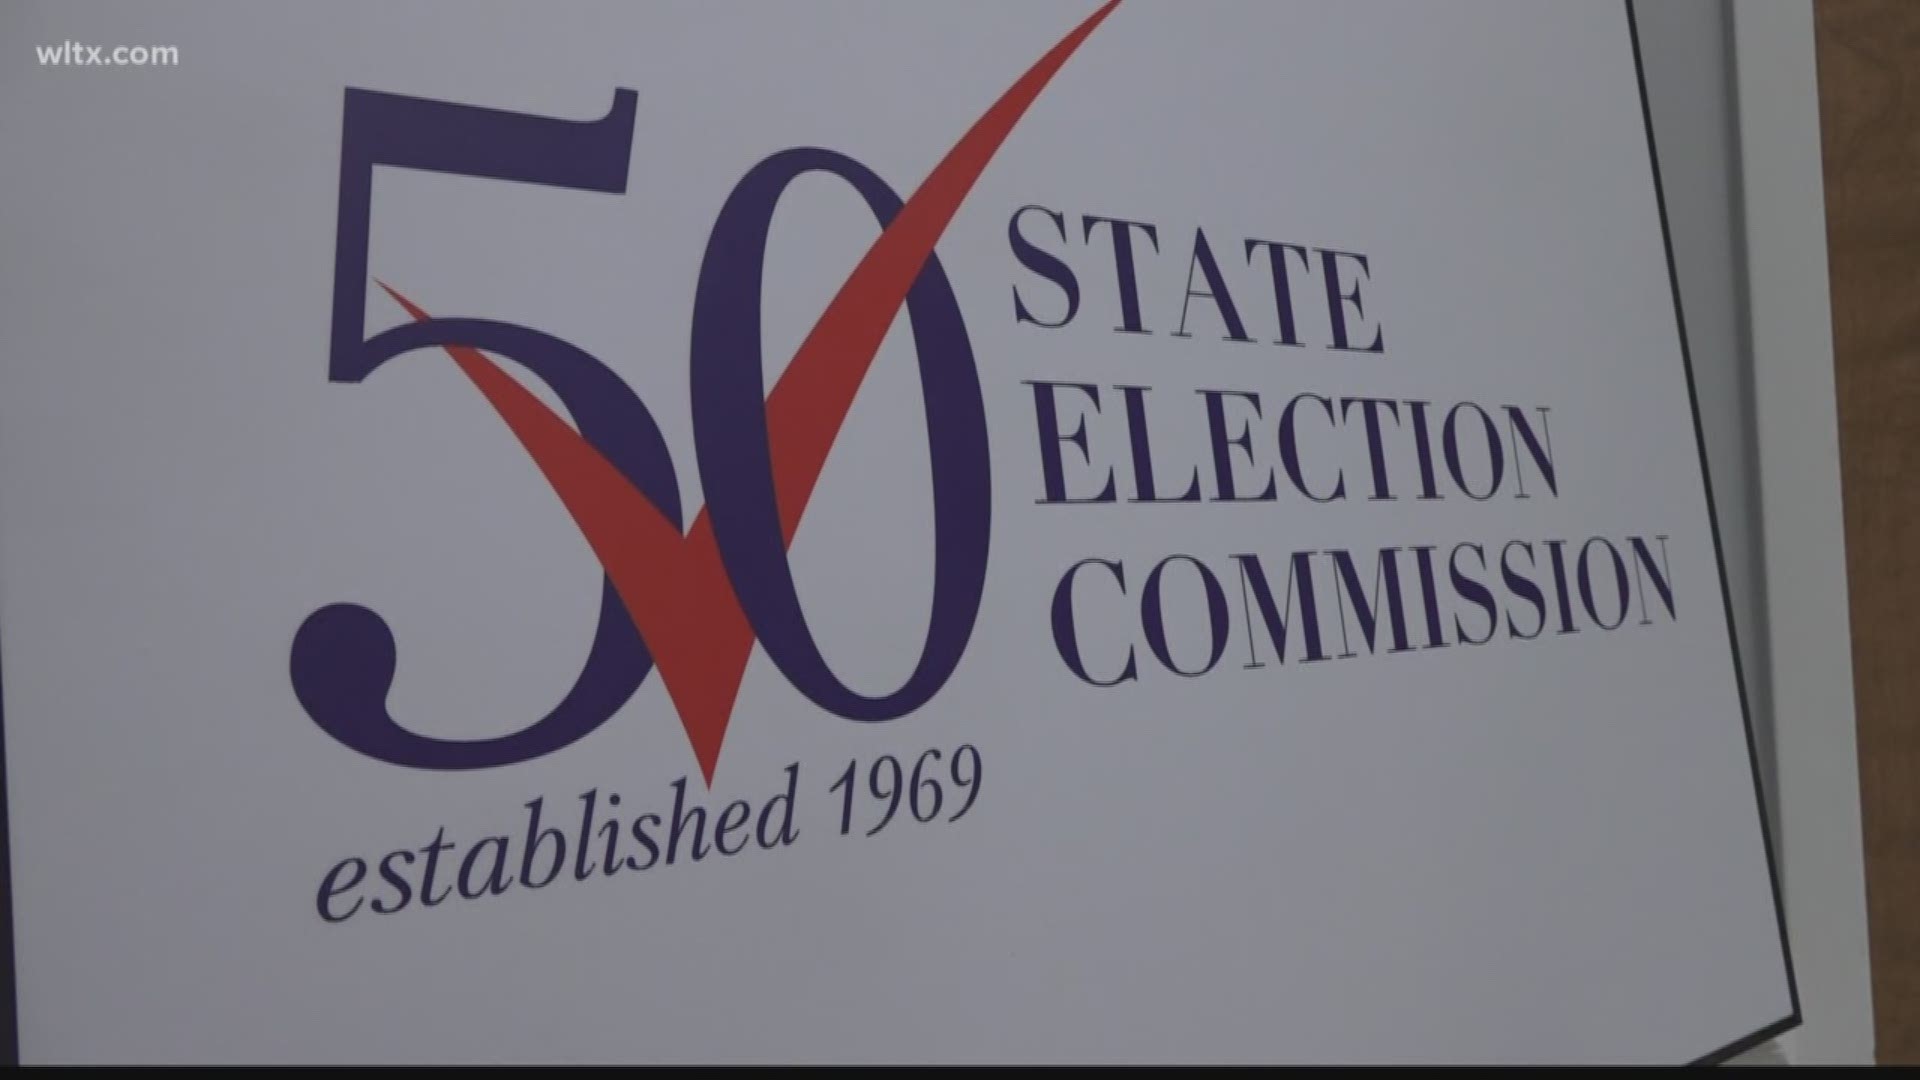 The move comes after it was revealed that over 1,000 votes weren't counted in the November 2018 elections.